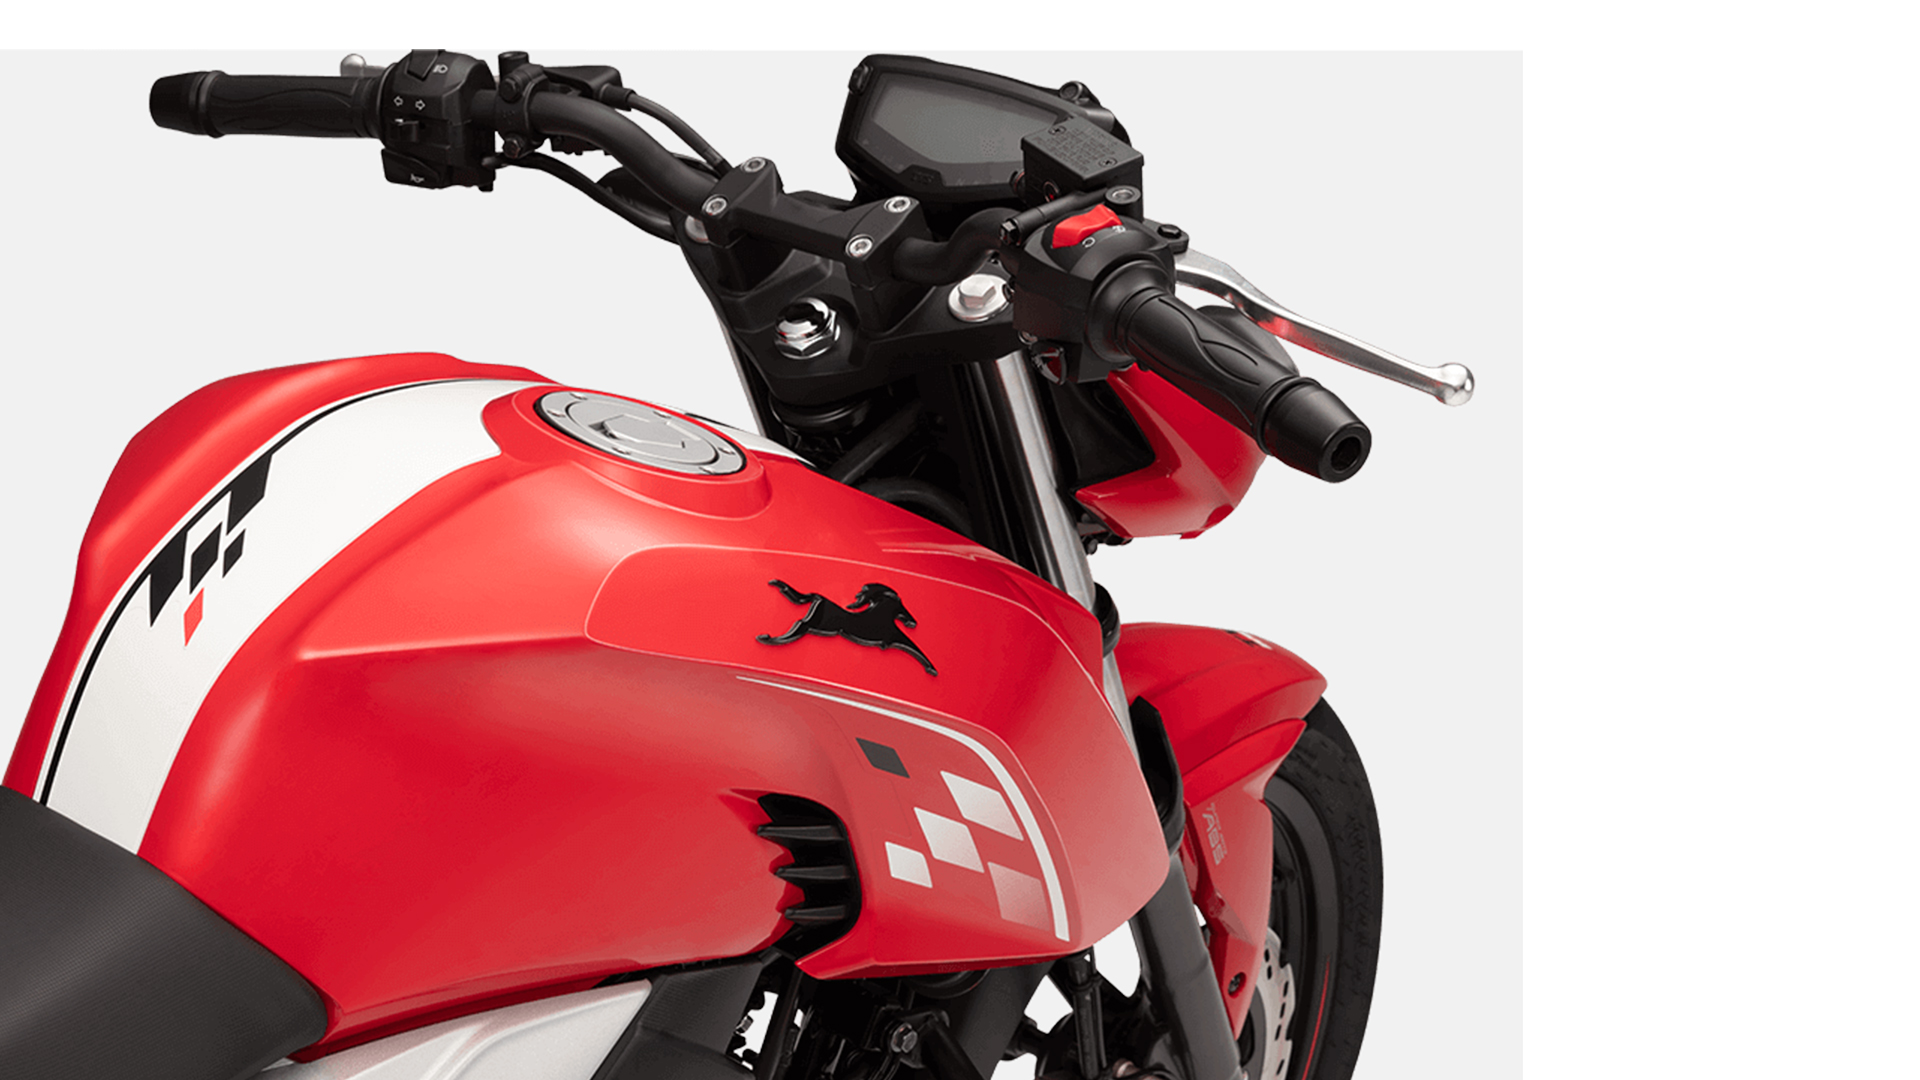 Tvs Apache Rtr 160 4v Disc Price Mileage Reviews Specification Gallery Overdrive